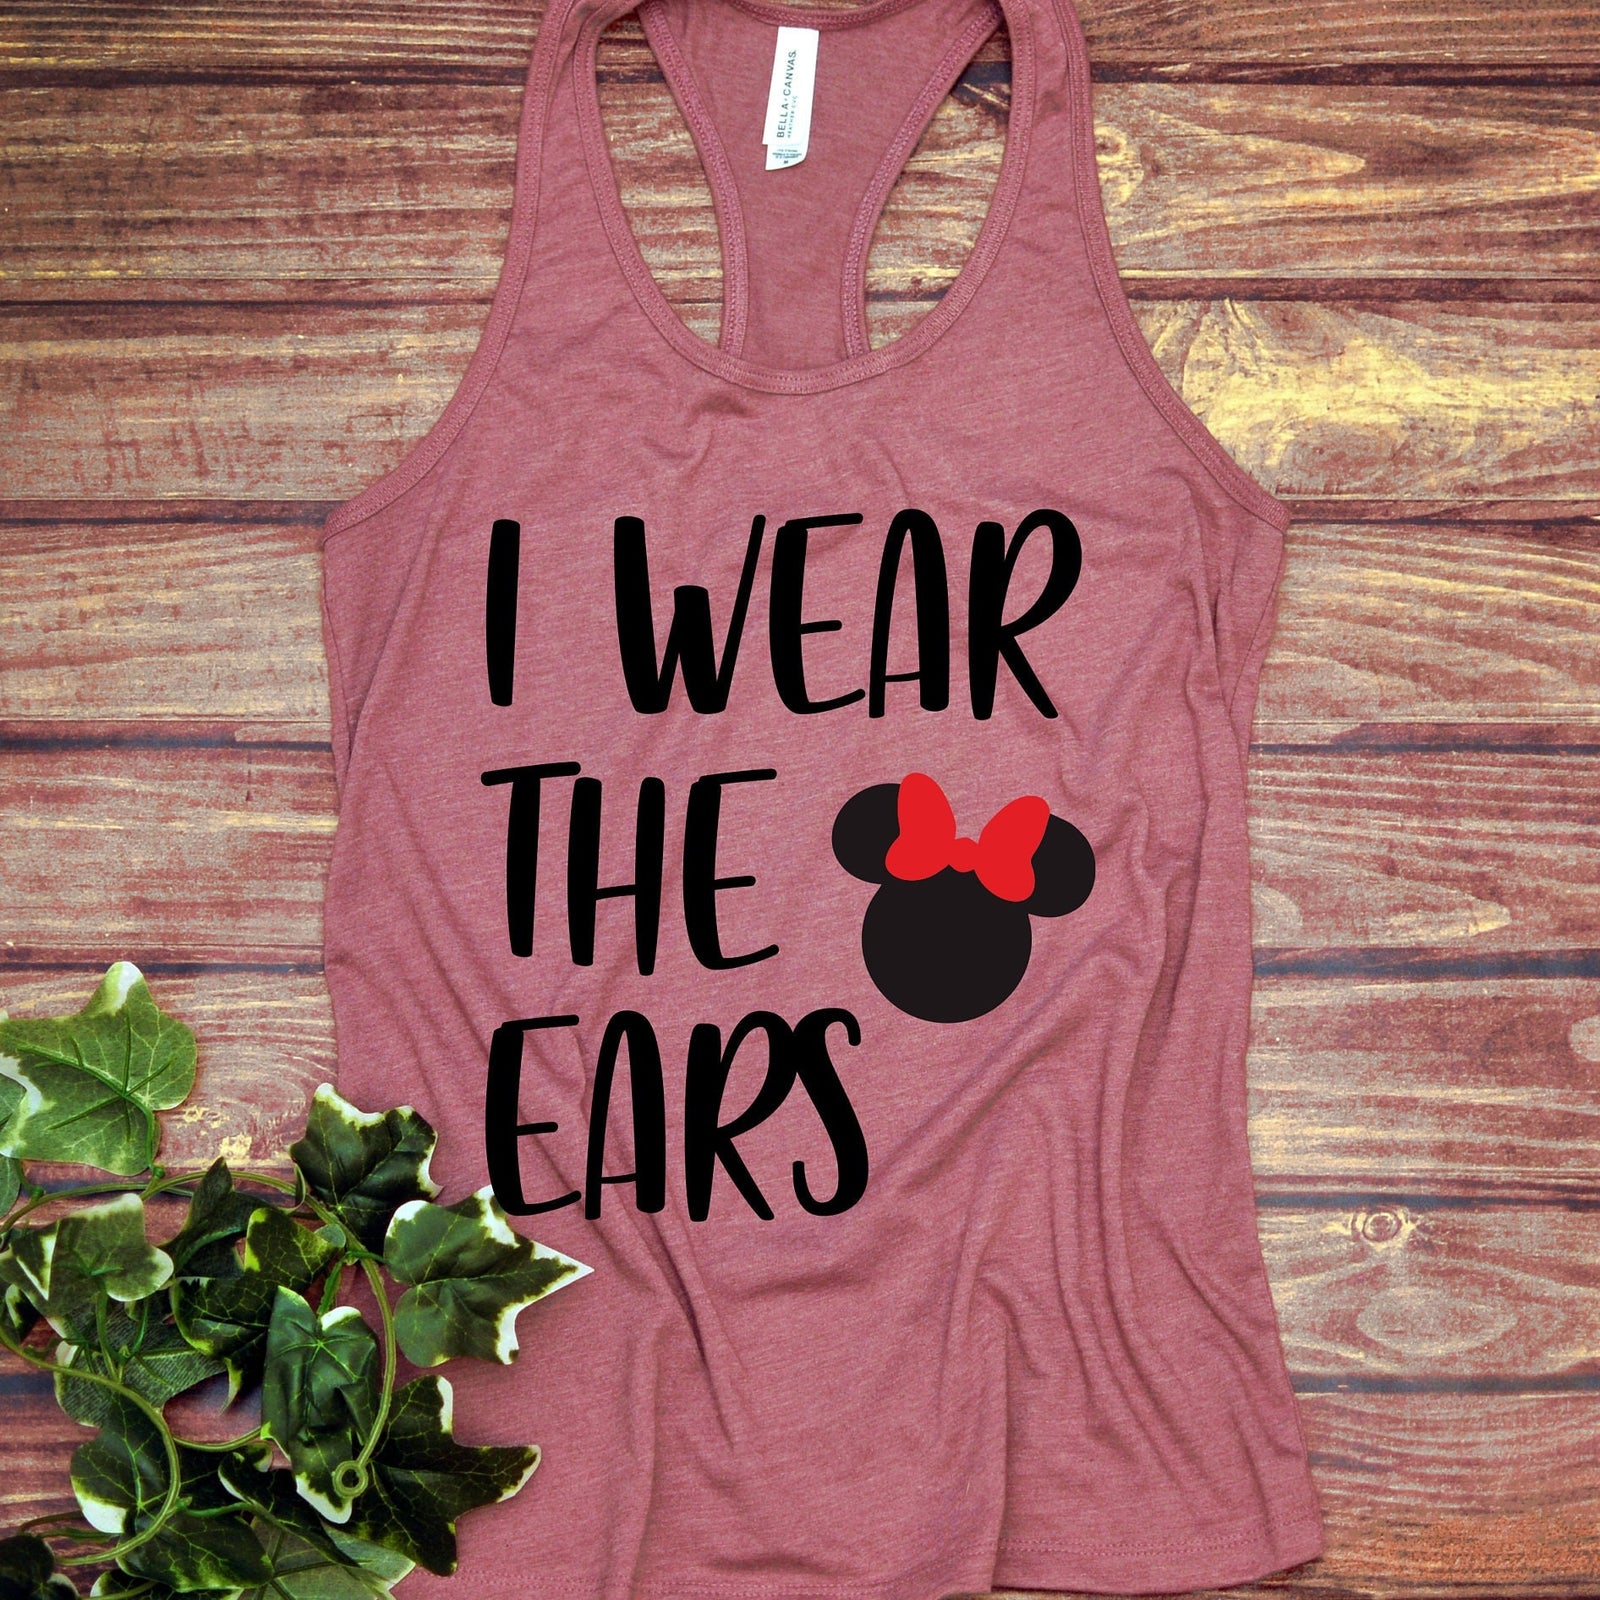 I Wear the Ears Minnie Mouse Adult Racer back Tank Top- Drinks - Epcot Food and Wine